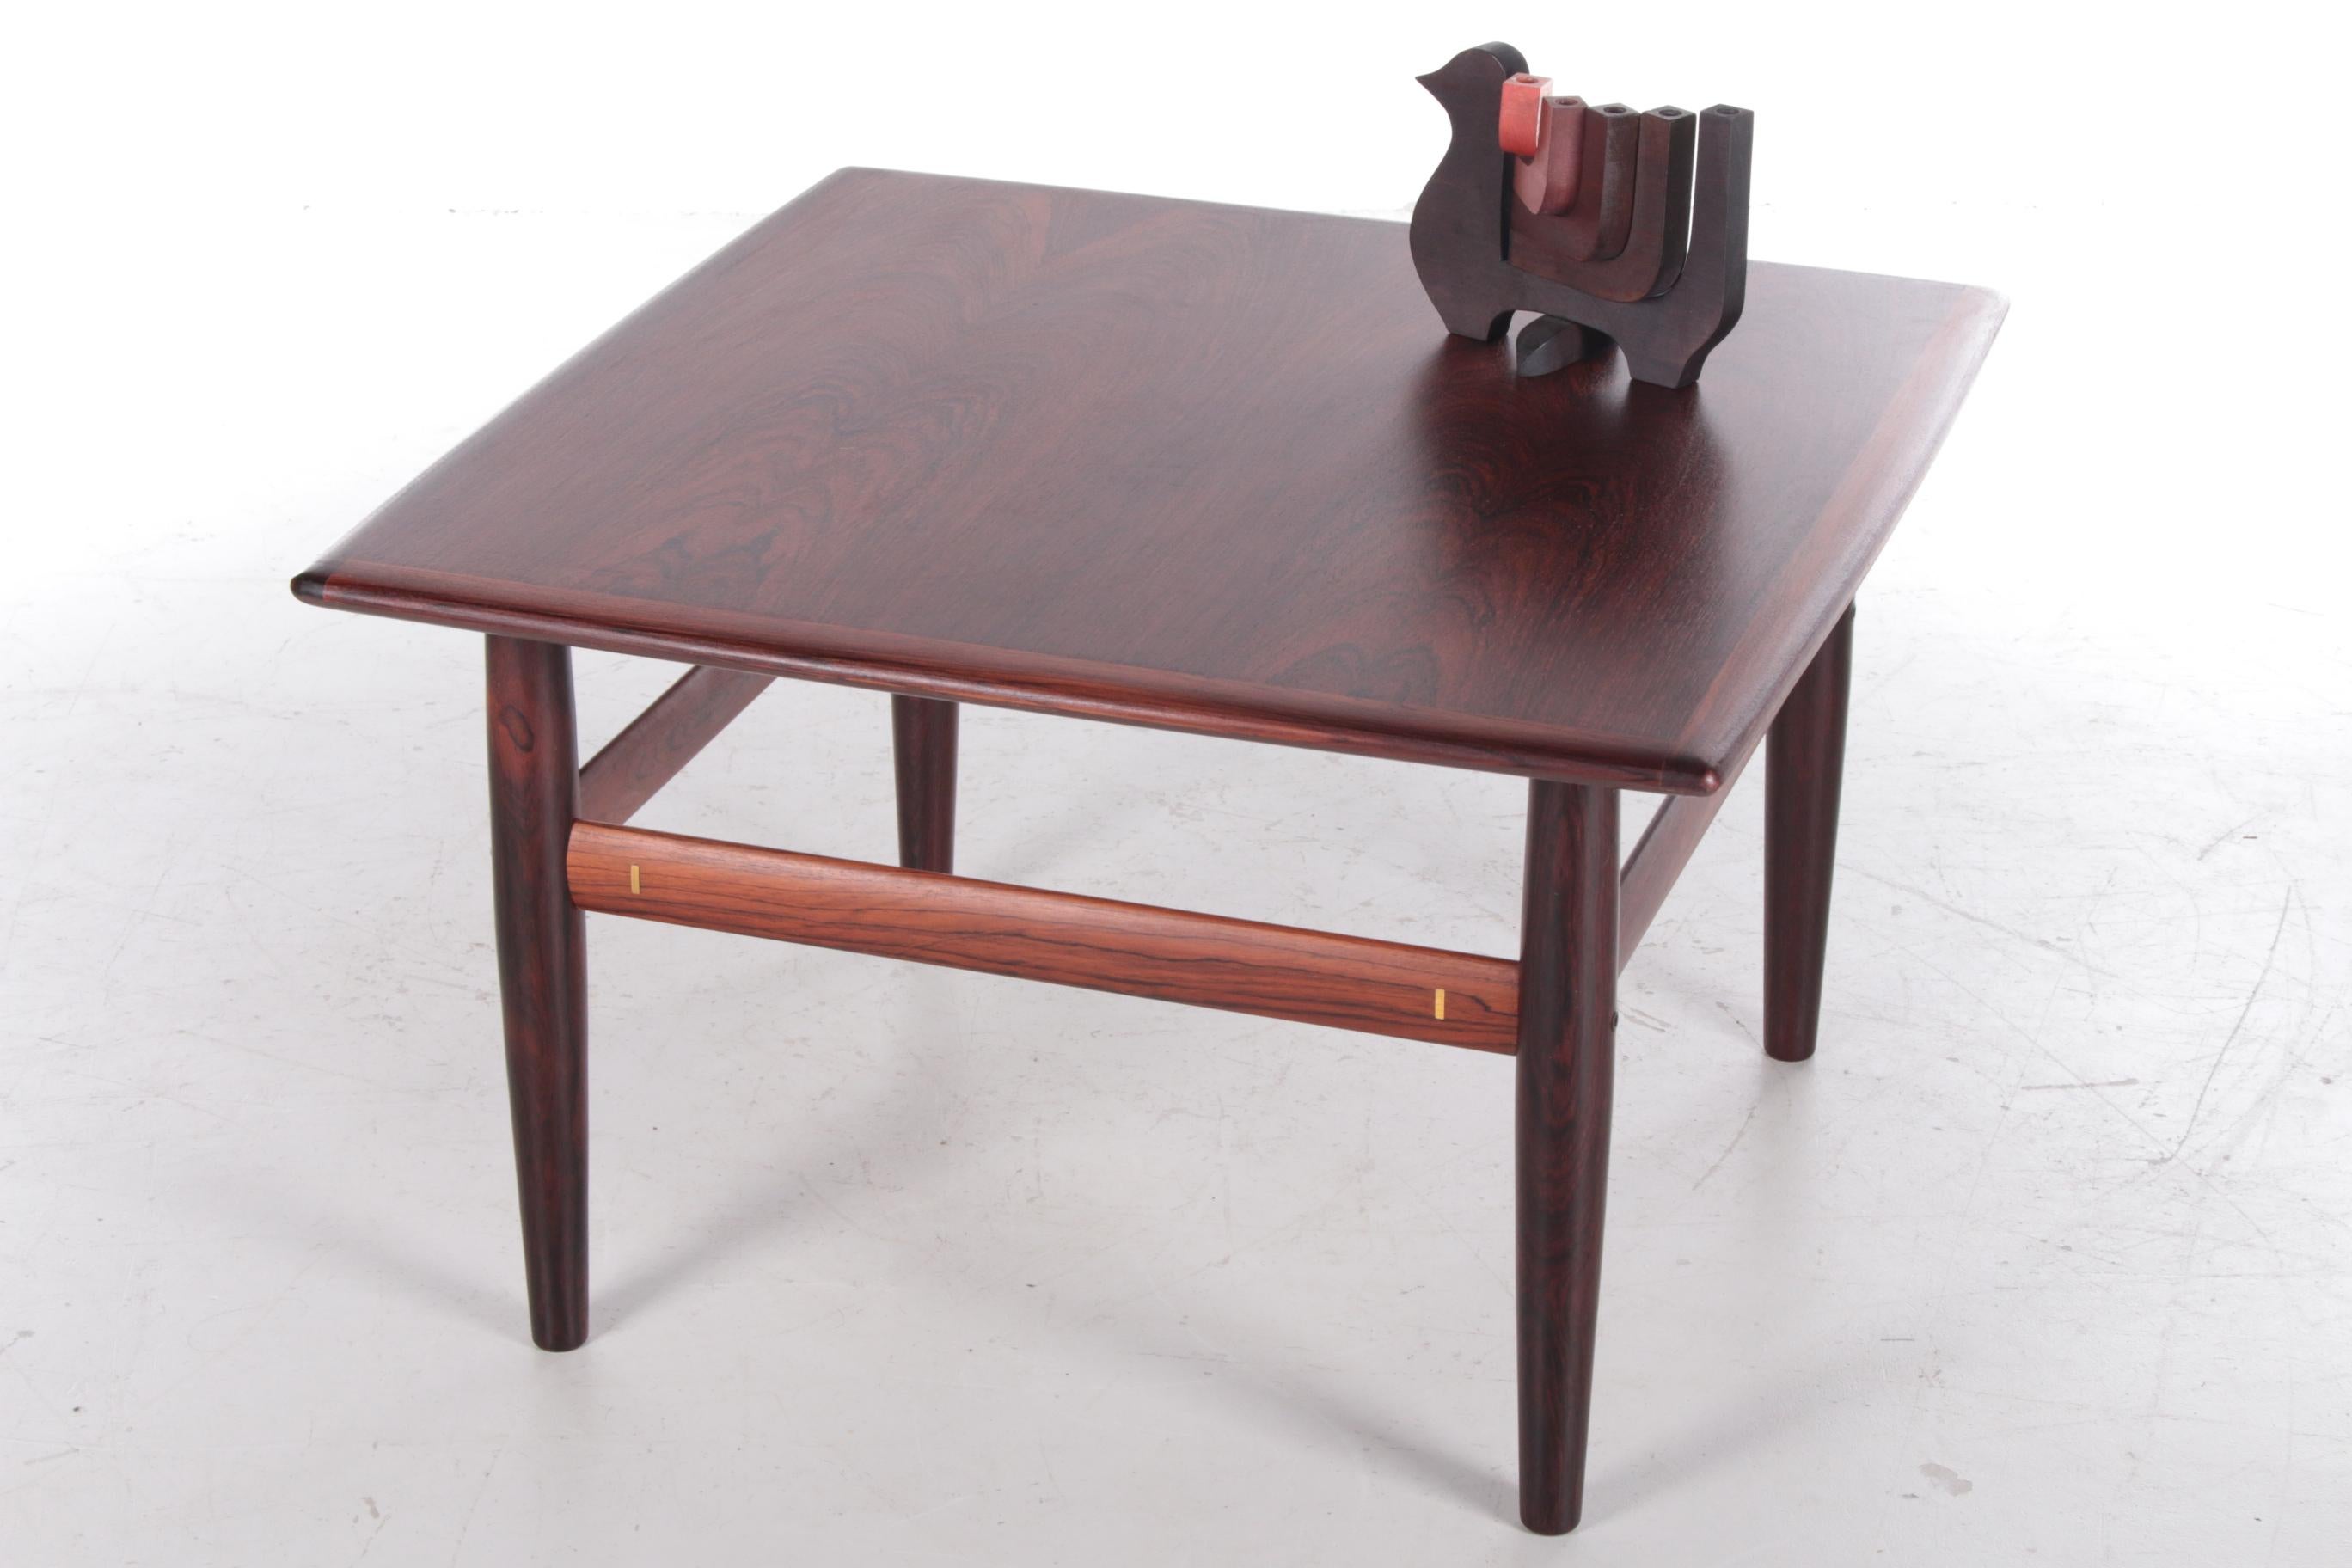 Vintage Darkwood coffee table pure class 1960s


Beautiful coffee table made of rio darkwood, this is also stated under the table with the date. (May 1968)

Nice square model and very sturdy.

This table also has special accents and brass has been